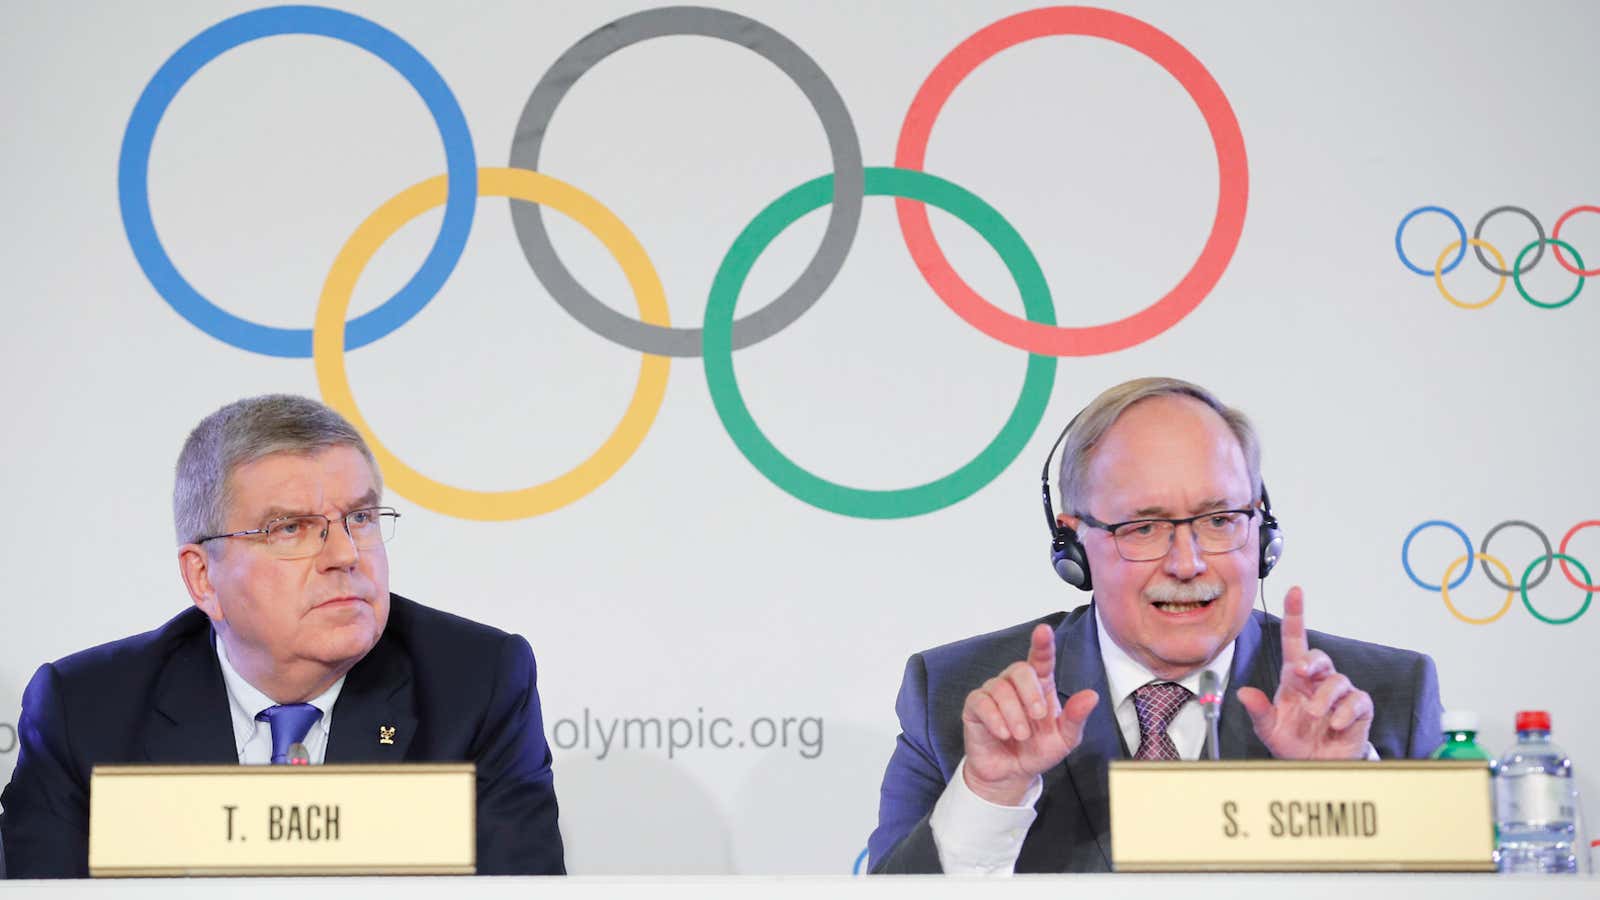 Olympic barons backed themselves into a corner by failing to act sooner to squelch doping.